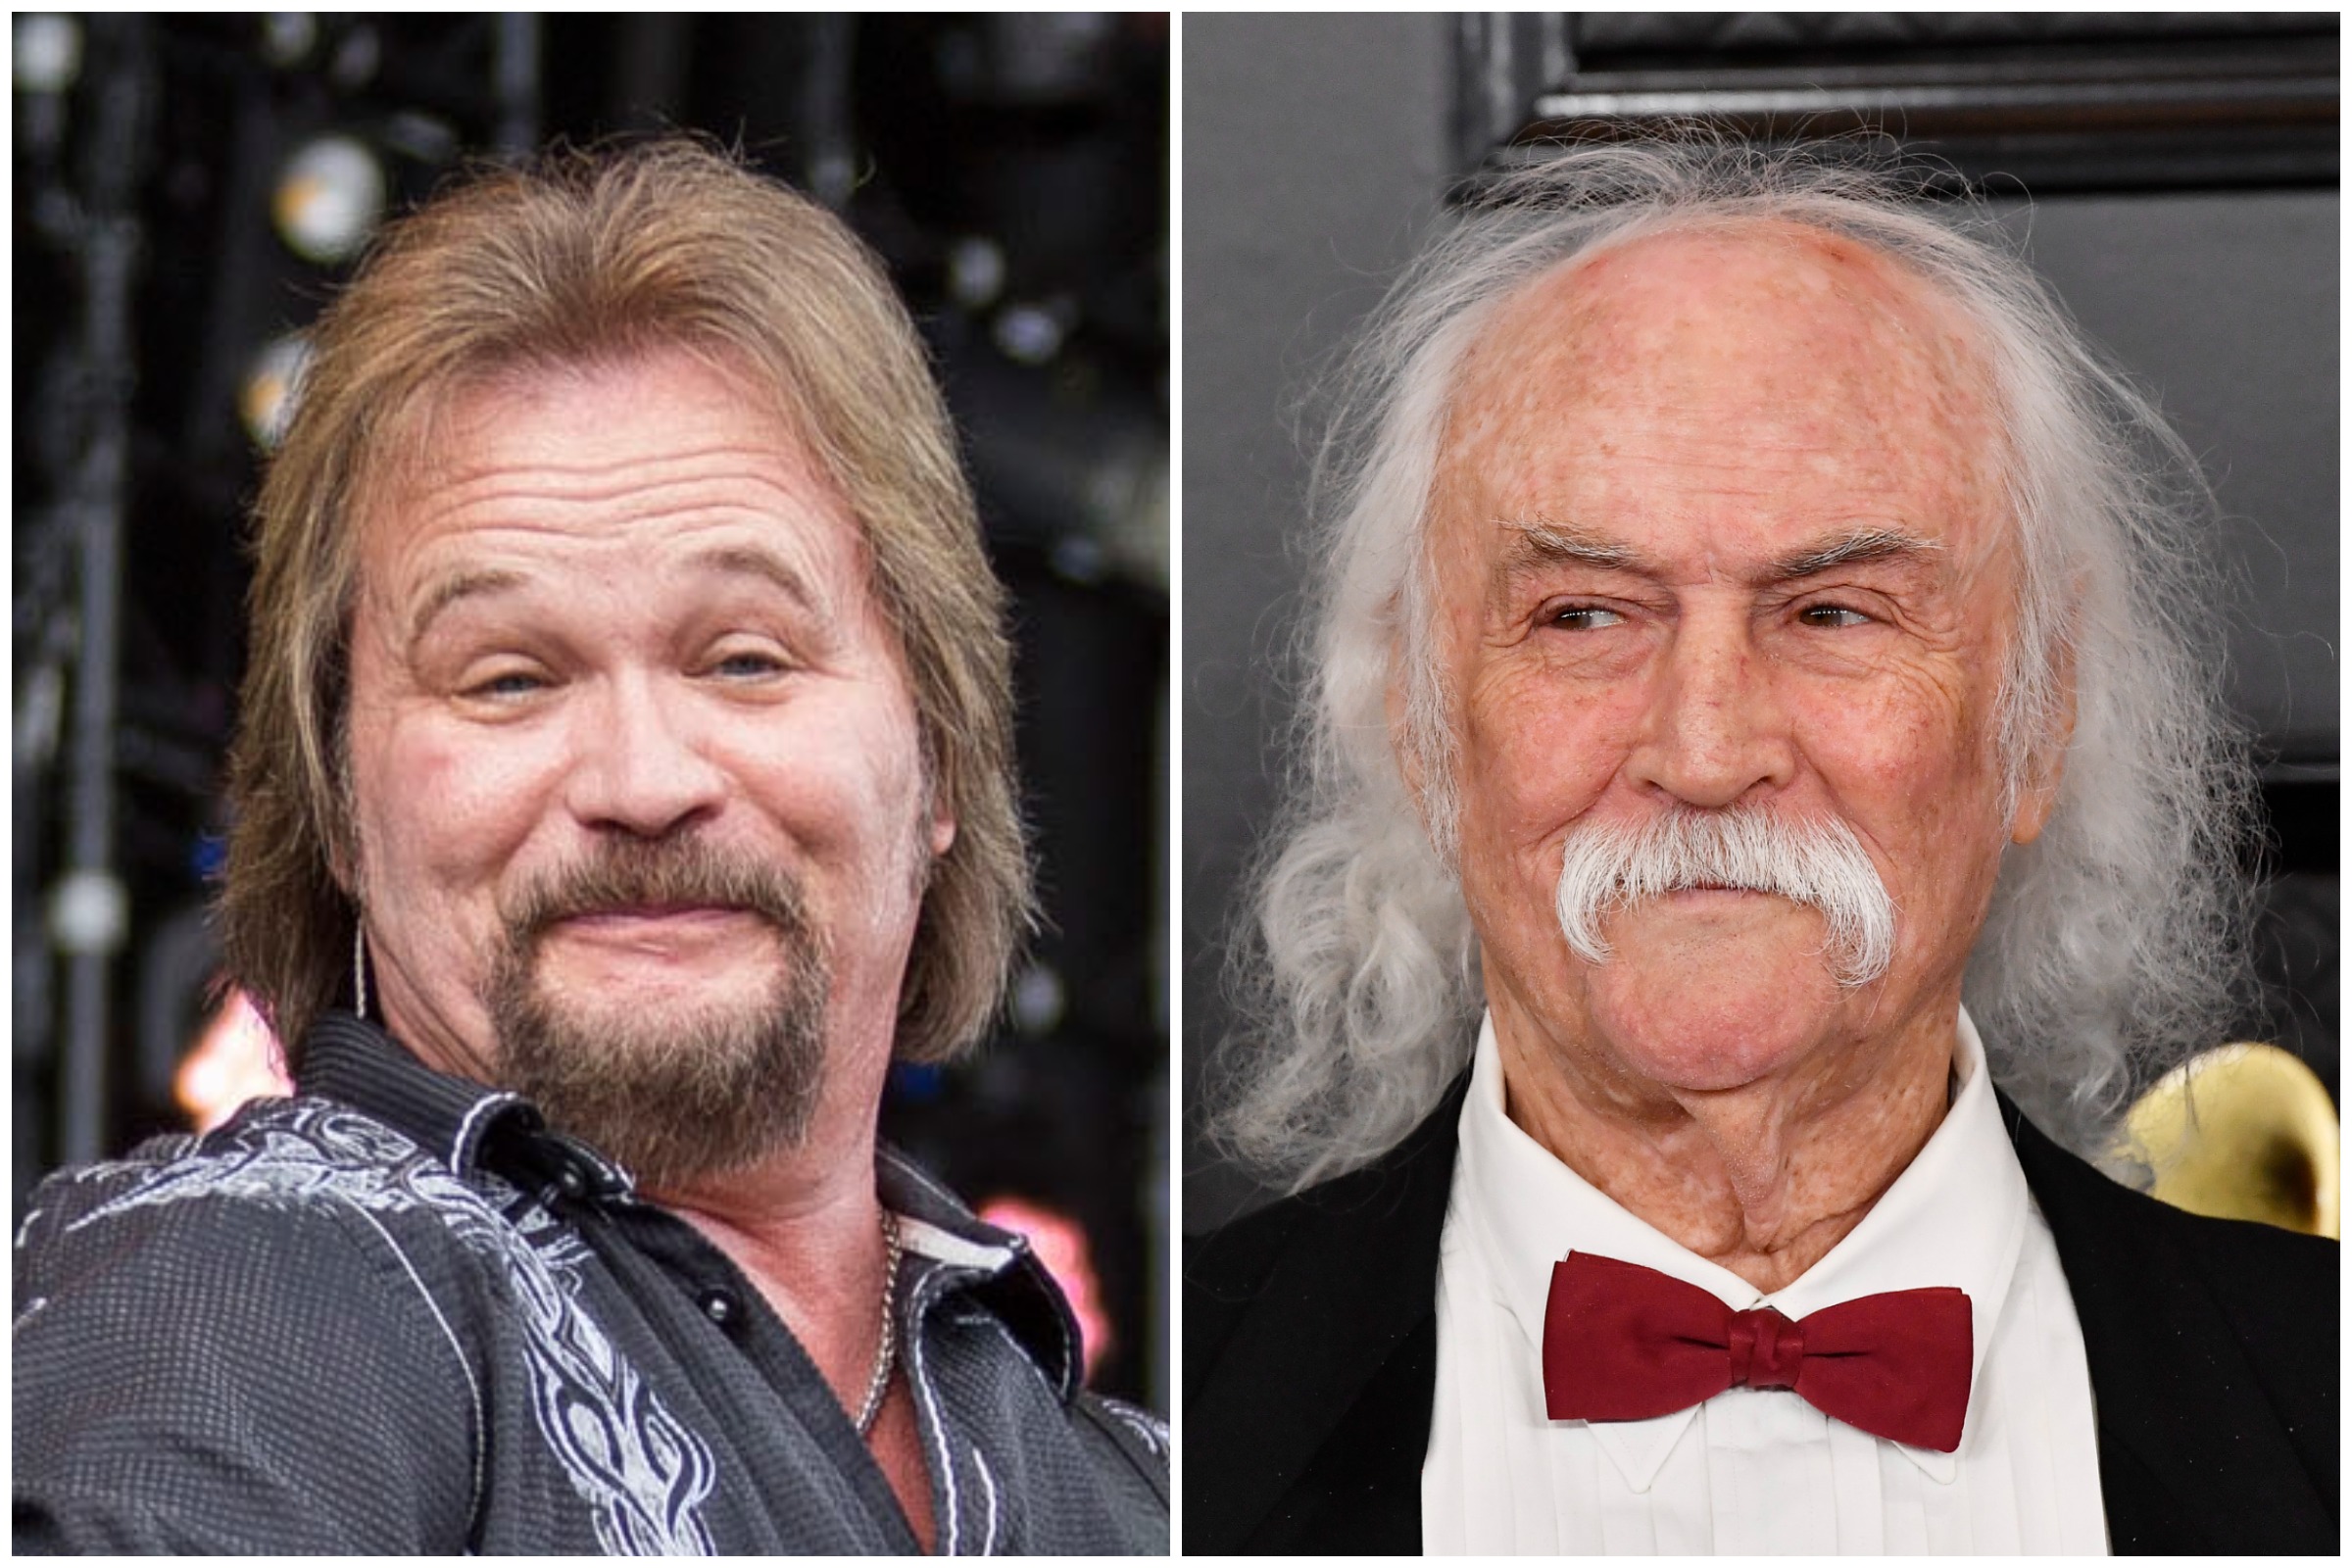 Travis Tritt: David Crosby 'Stupid' for Bid To Pull Spotify Songs He Does  not Own